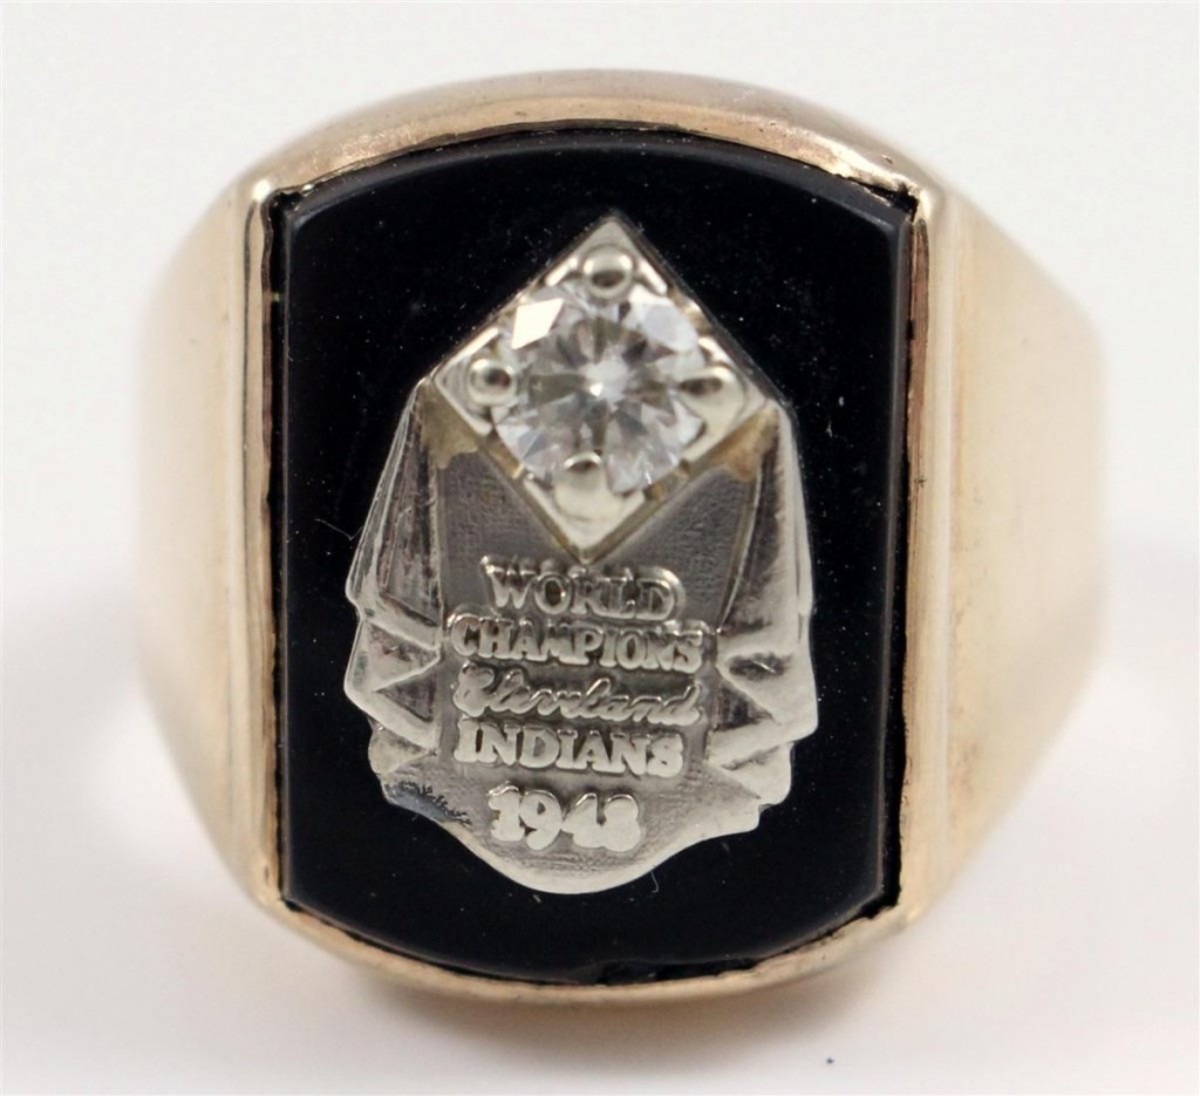 1948 Cleveland Indians Championship ring